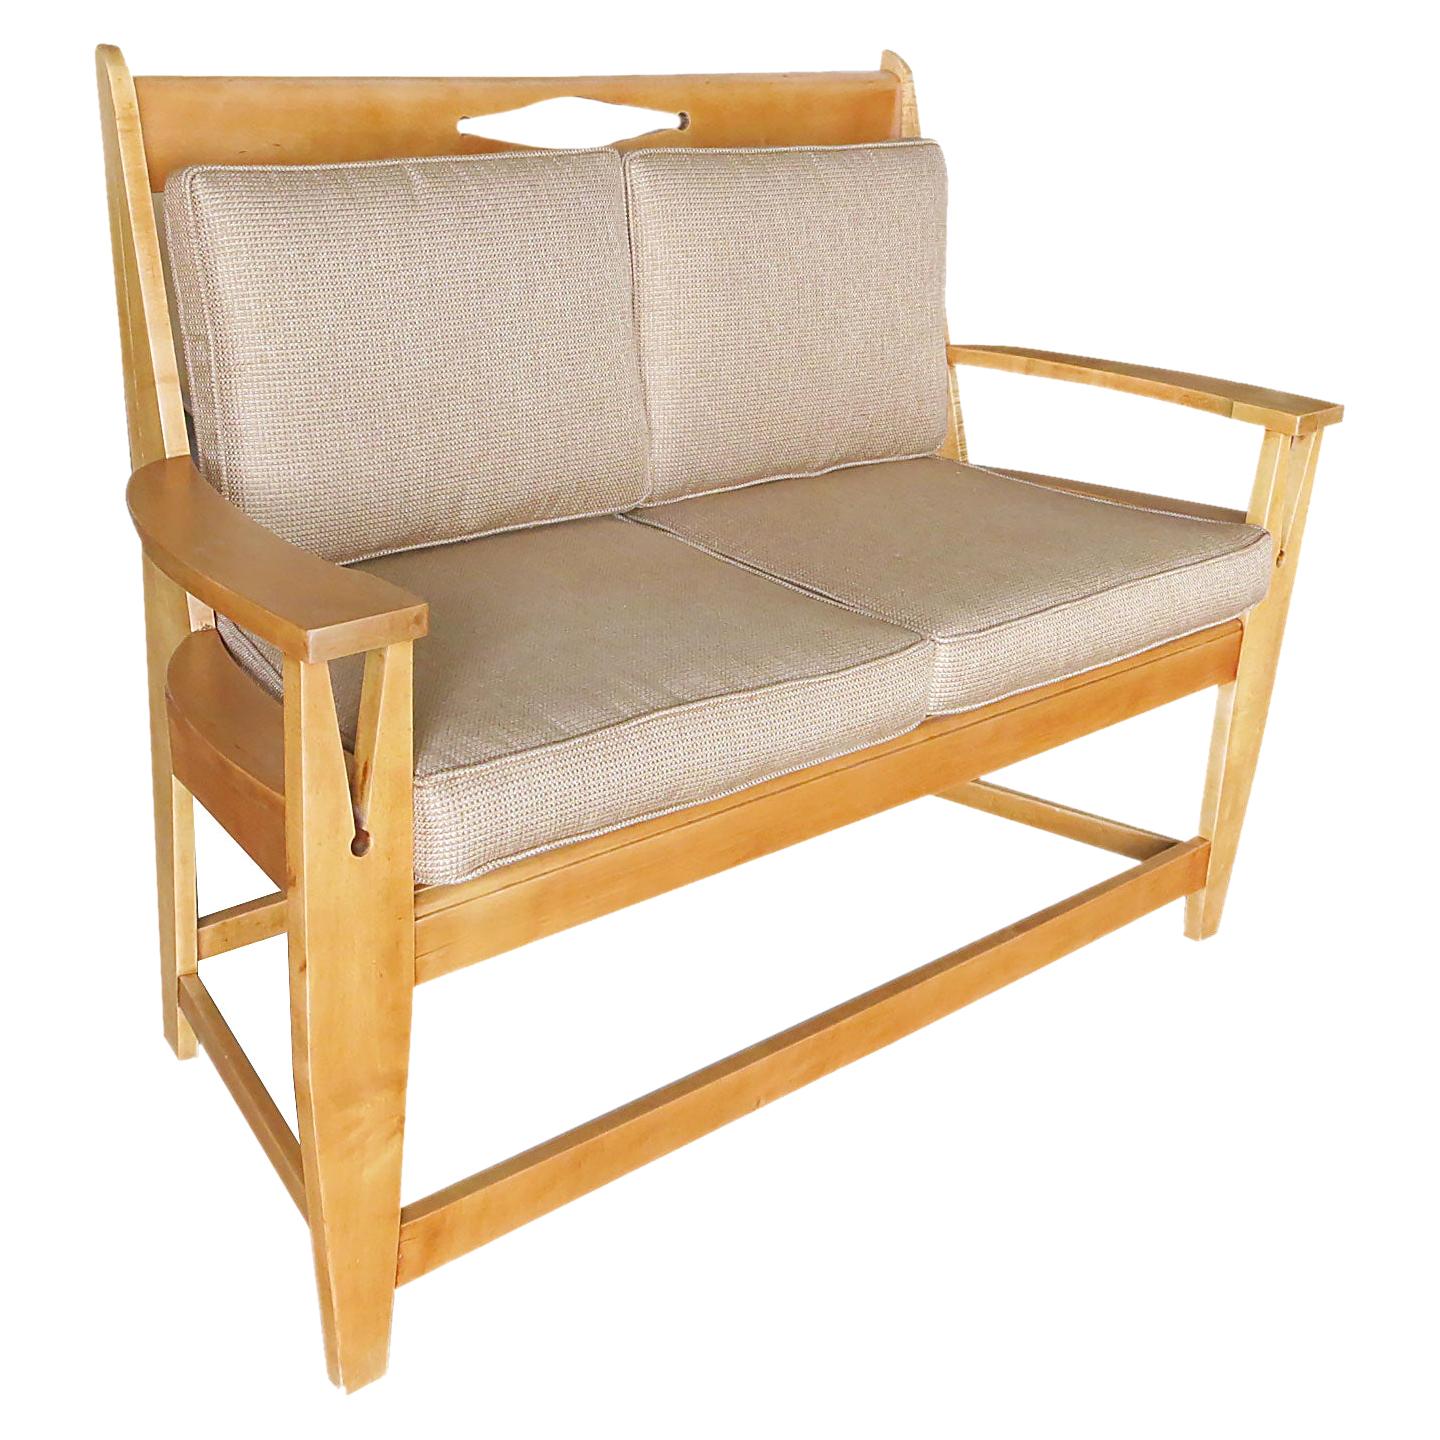 Blonde Wood Sofa with Clothespin Shaped Accents